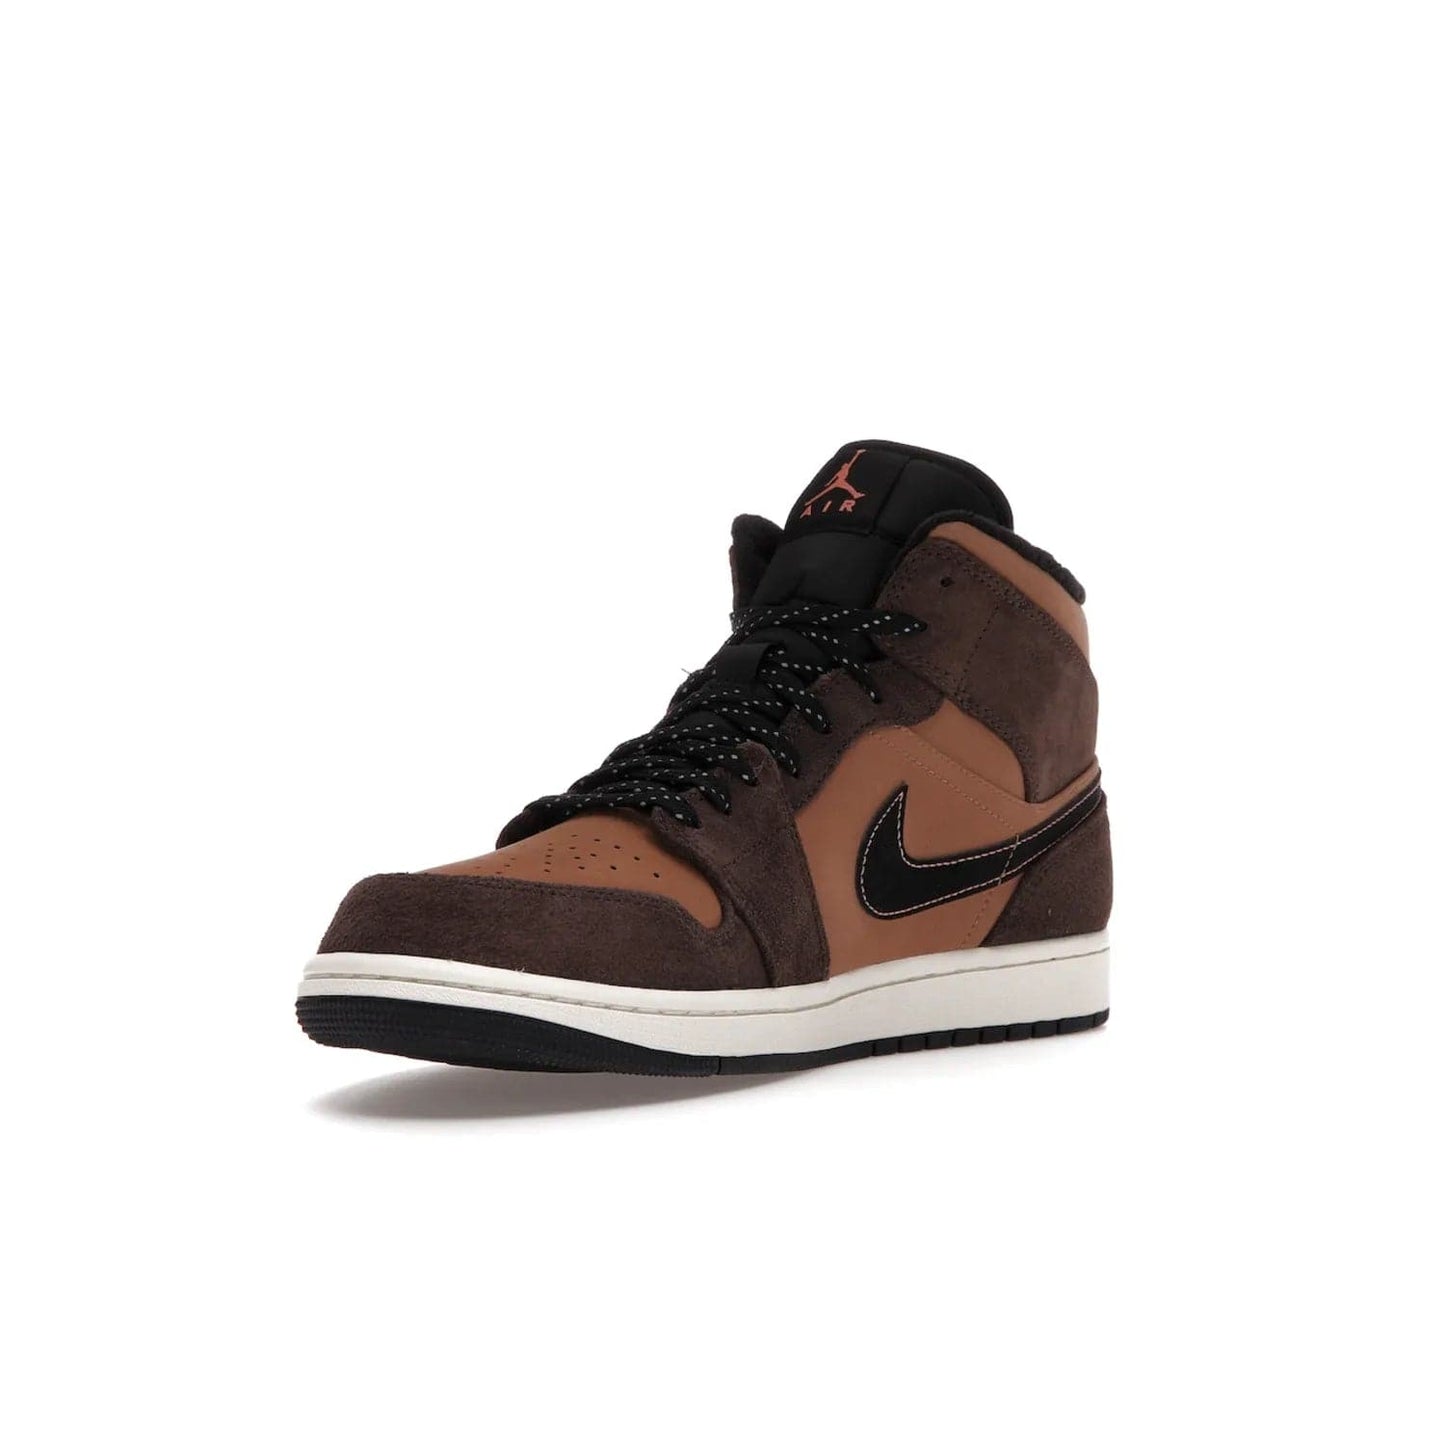 Jordan 1 Mid SE Dark Chocolate - Image 14 - Only at www.BallersClubKickz.com - This fashionable and functional Jordan 1 Mid SE Dark Chocolate features a light brown Durabuck upper, dark brown suede overlays, black Swoosh logos and reflective patch at heel. A must-have for any sneakerhead!